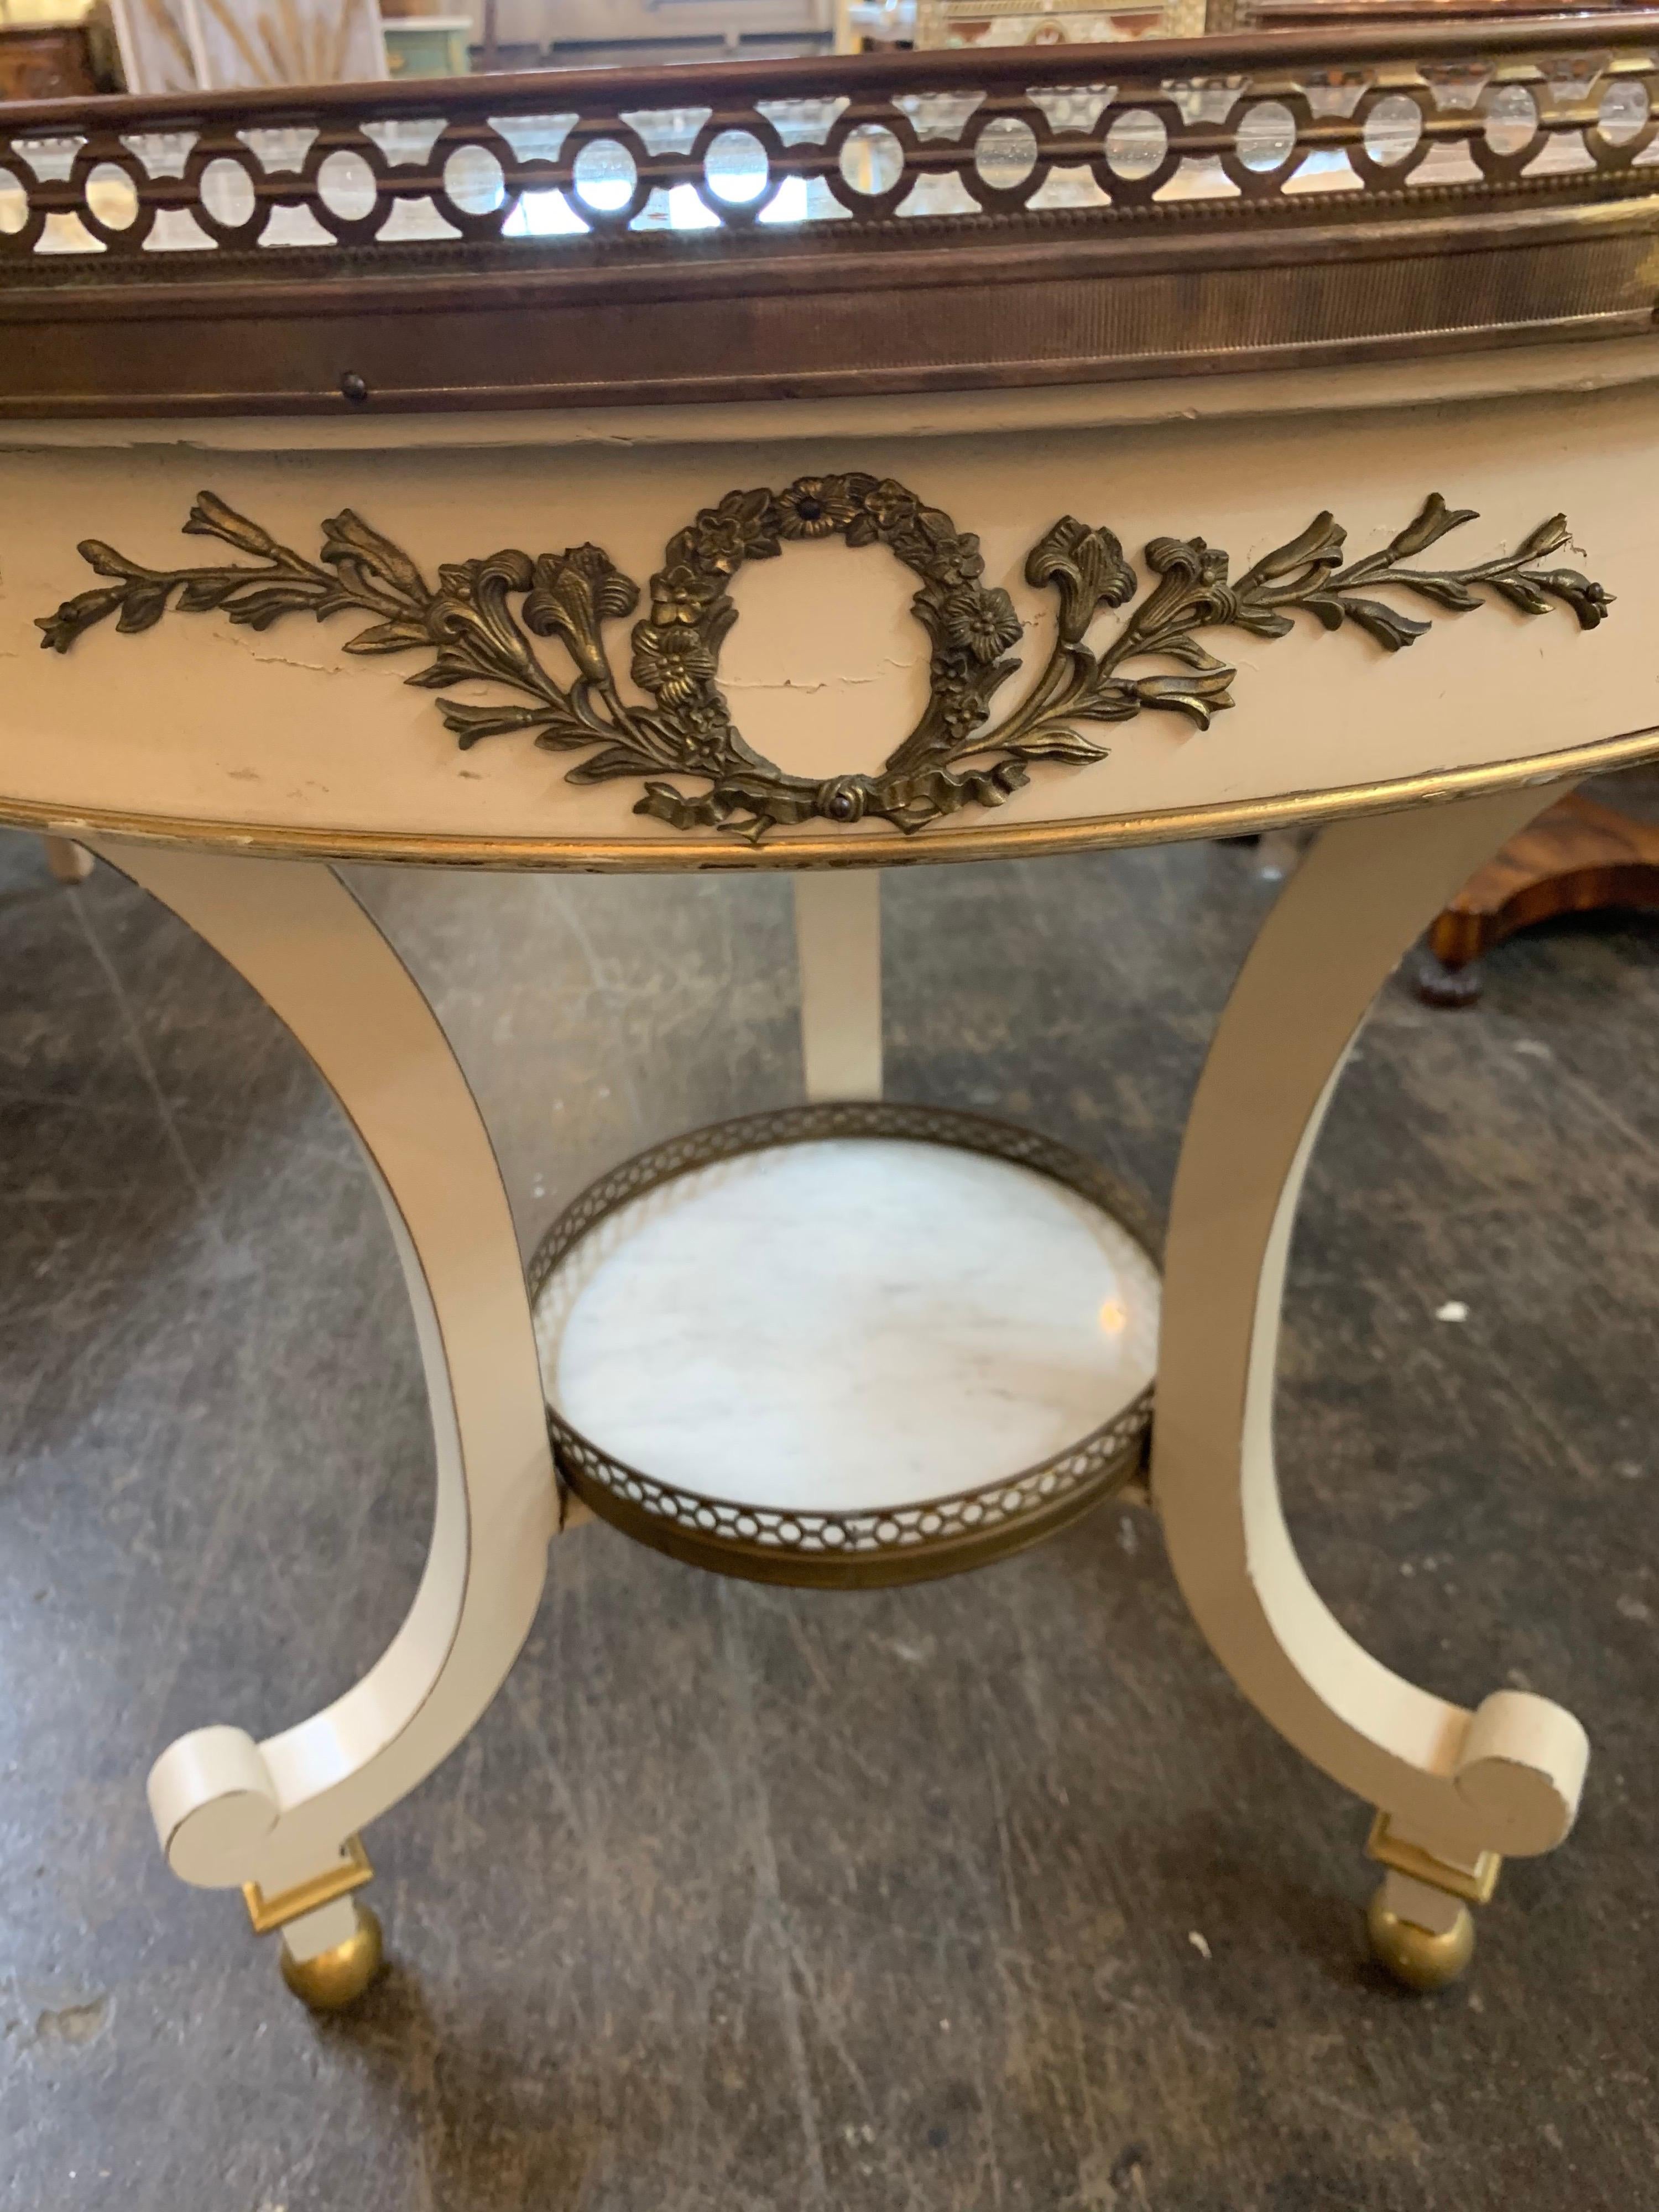 Lovely French Jansen style lacquered brass occasional table with foil mirror top. Nice decorative brass pieces along with curved legs. So pretty! Note there is a crack in the glass. Sold as is.